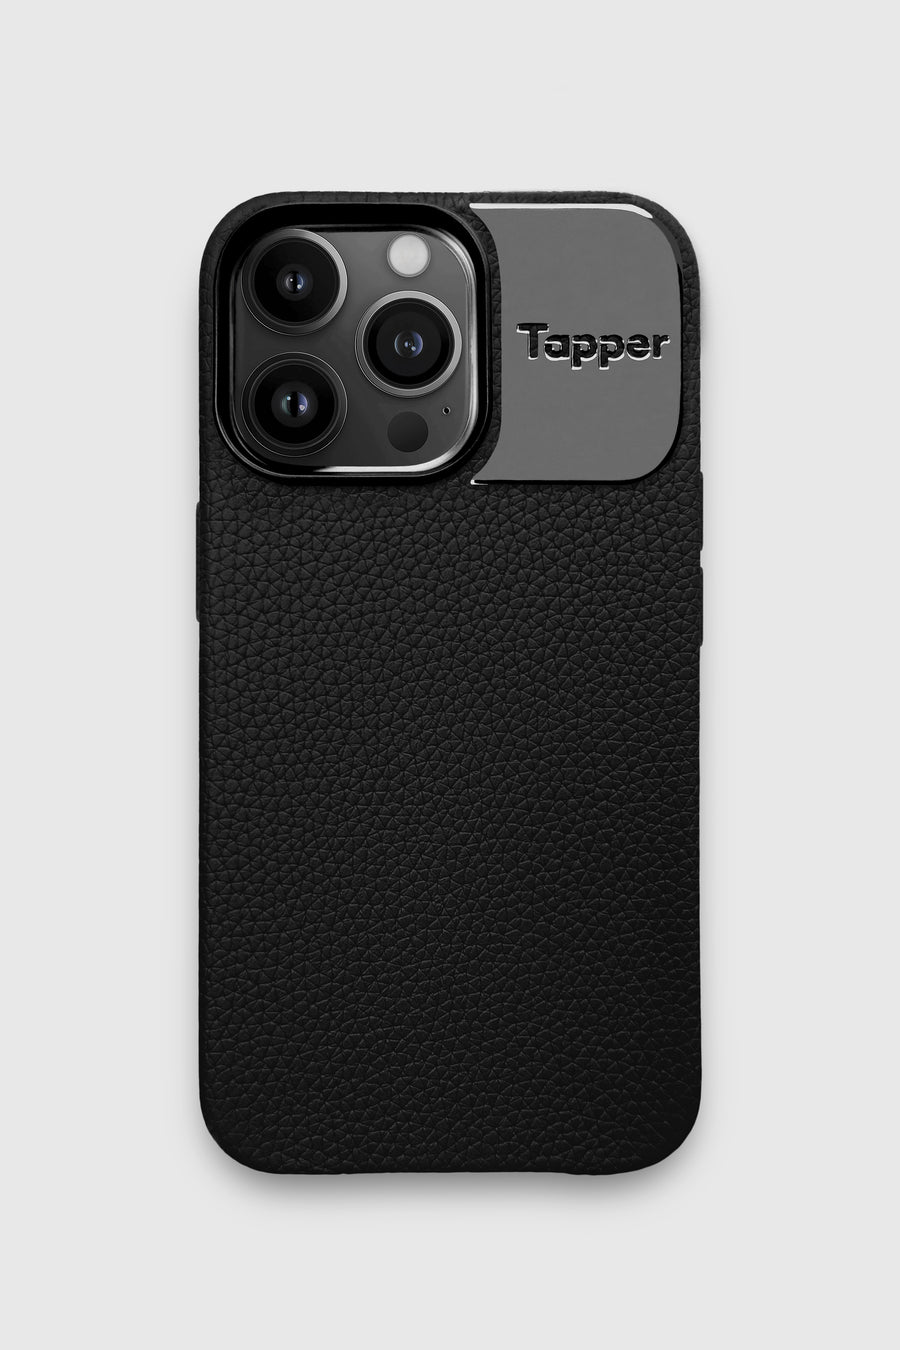 Tapper's luxurious black genuine cow leather iPhone 13 Pro case with MagSafe and a metal logo plate in hematite black plating that protects and elevates the look of your iPhone 13 Pro. The next must-have high end protective Apple iPhone accessory in real leather and precious metals. Designed in Sweden by Tapper. Free Express Shipping at gettapper.com